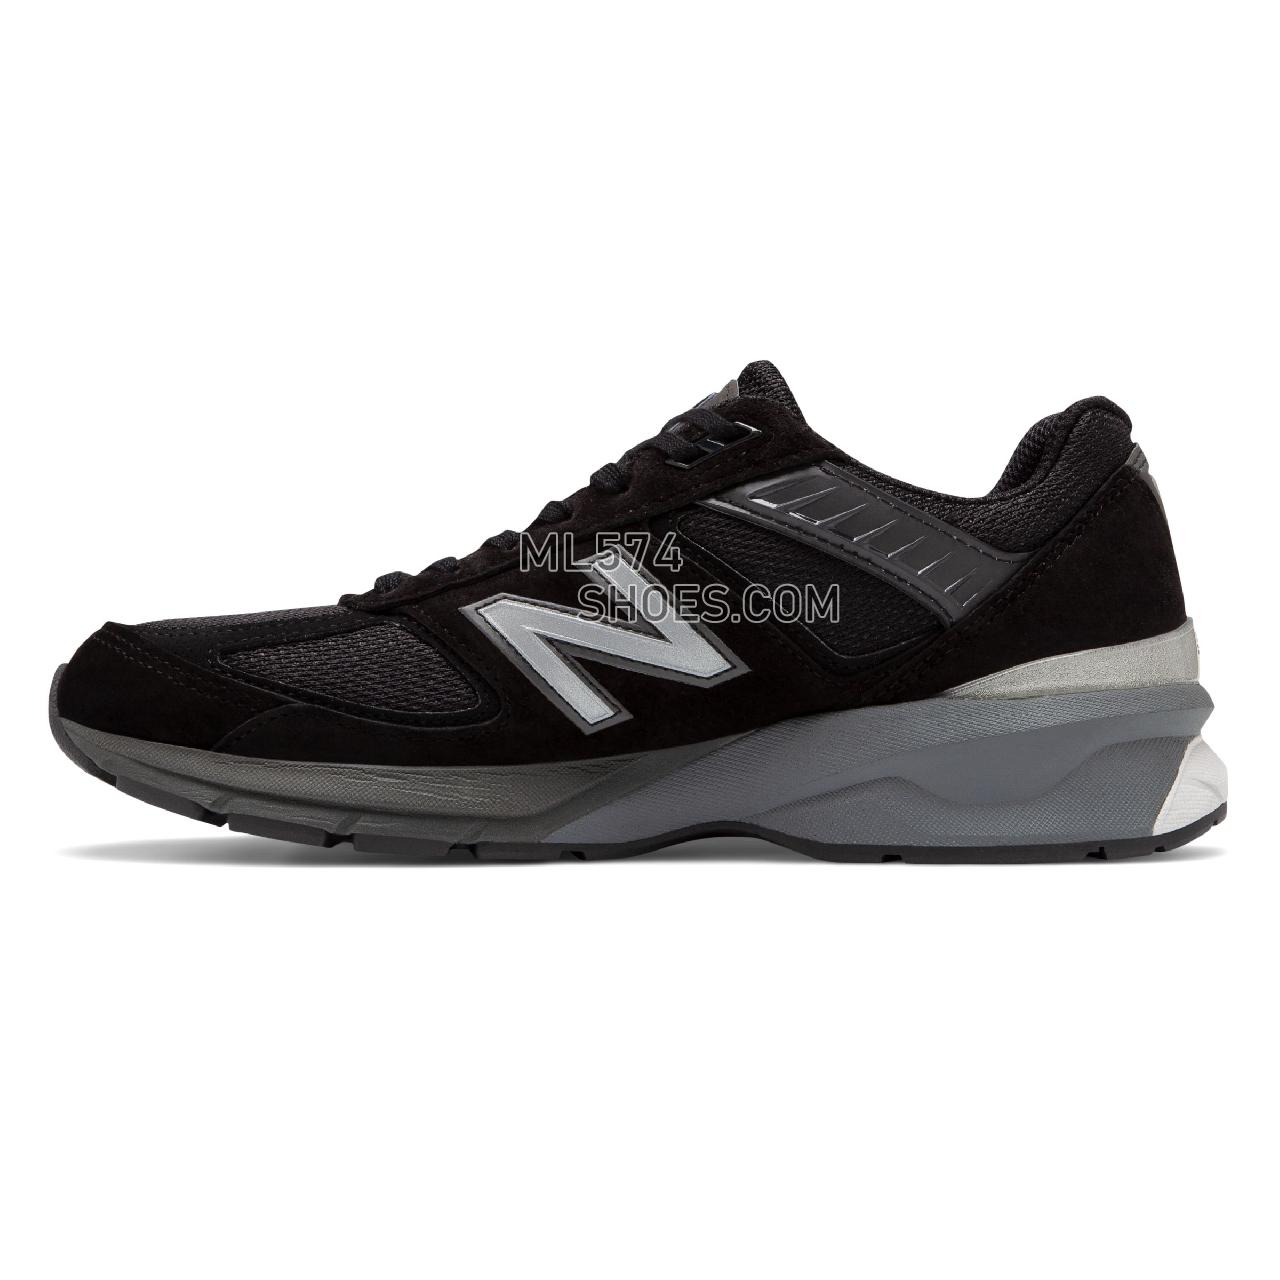 New Balance 990v5 Made in US - Men's Neutral Running - Black with Silver - M990BK5